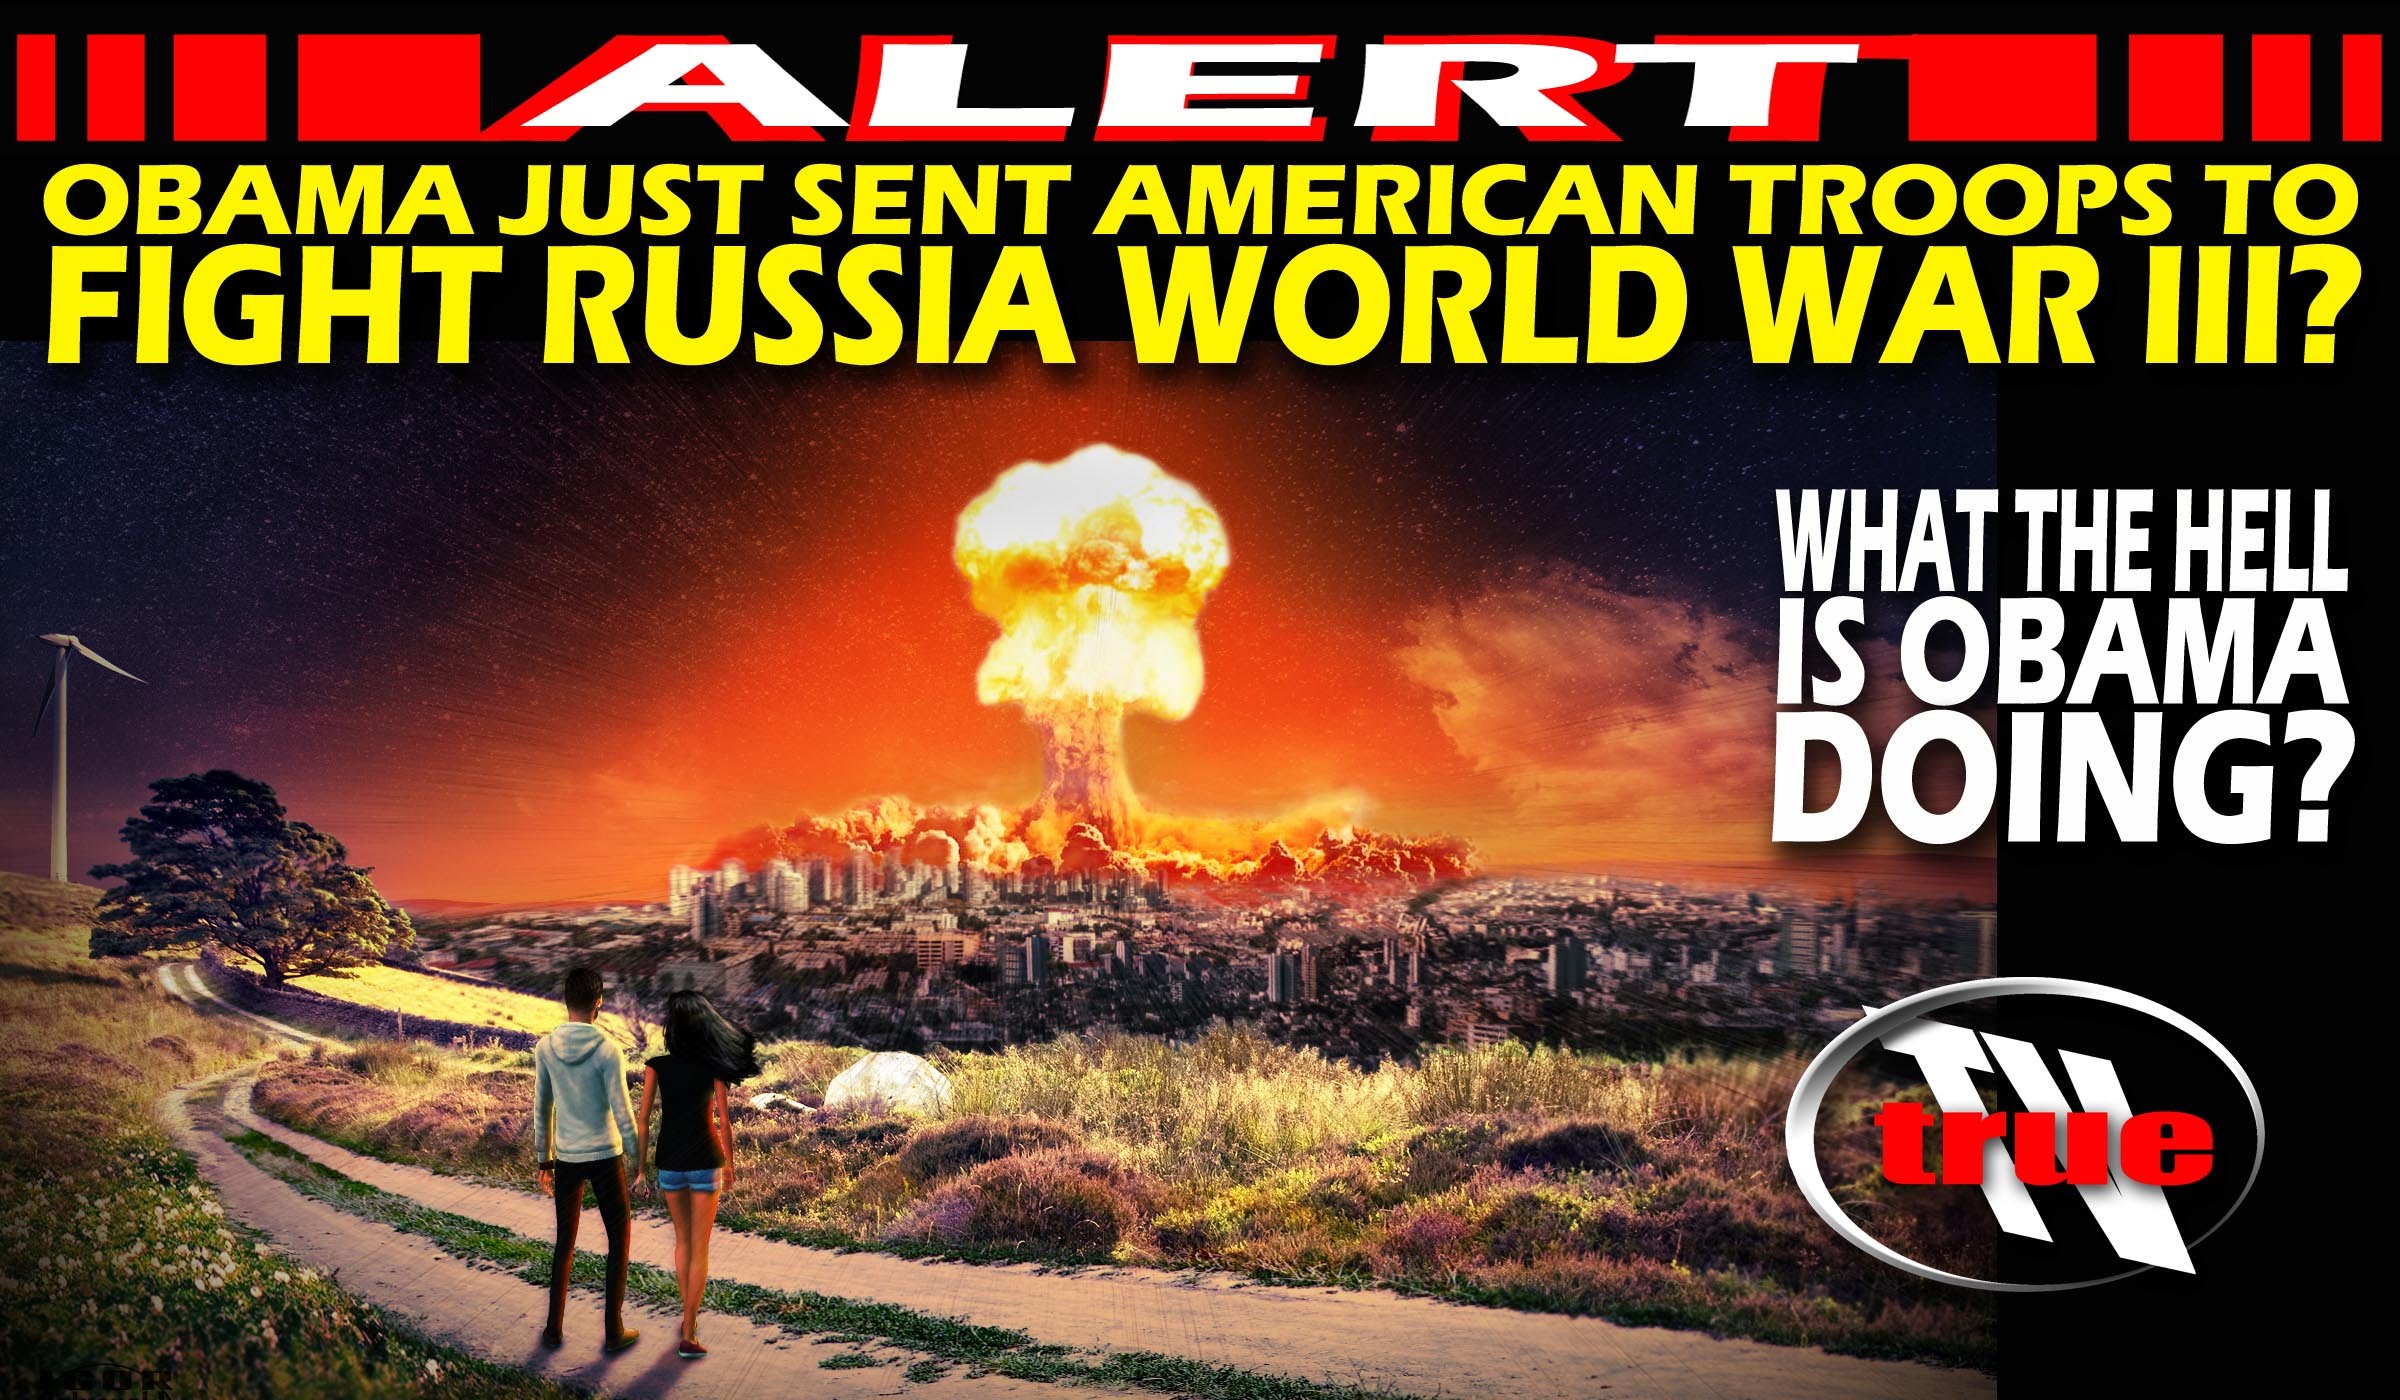 OBAMA SENDS AMERICAN TROOPS TO FIGHT WITH RUSSIA WILL THIS START WORLD WAR III?